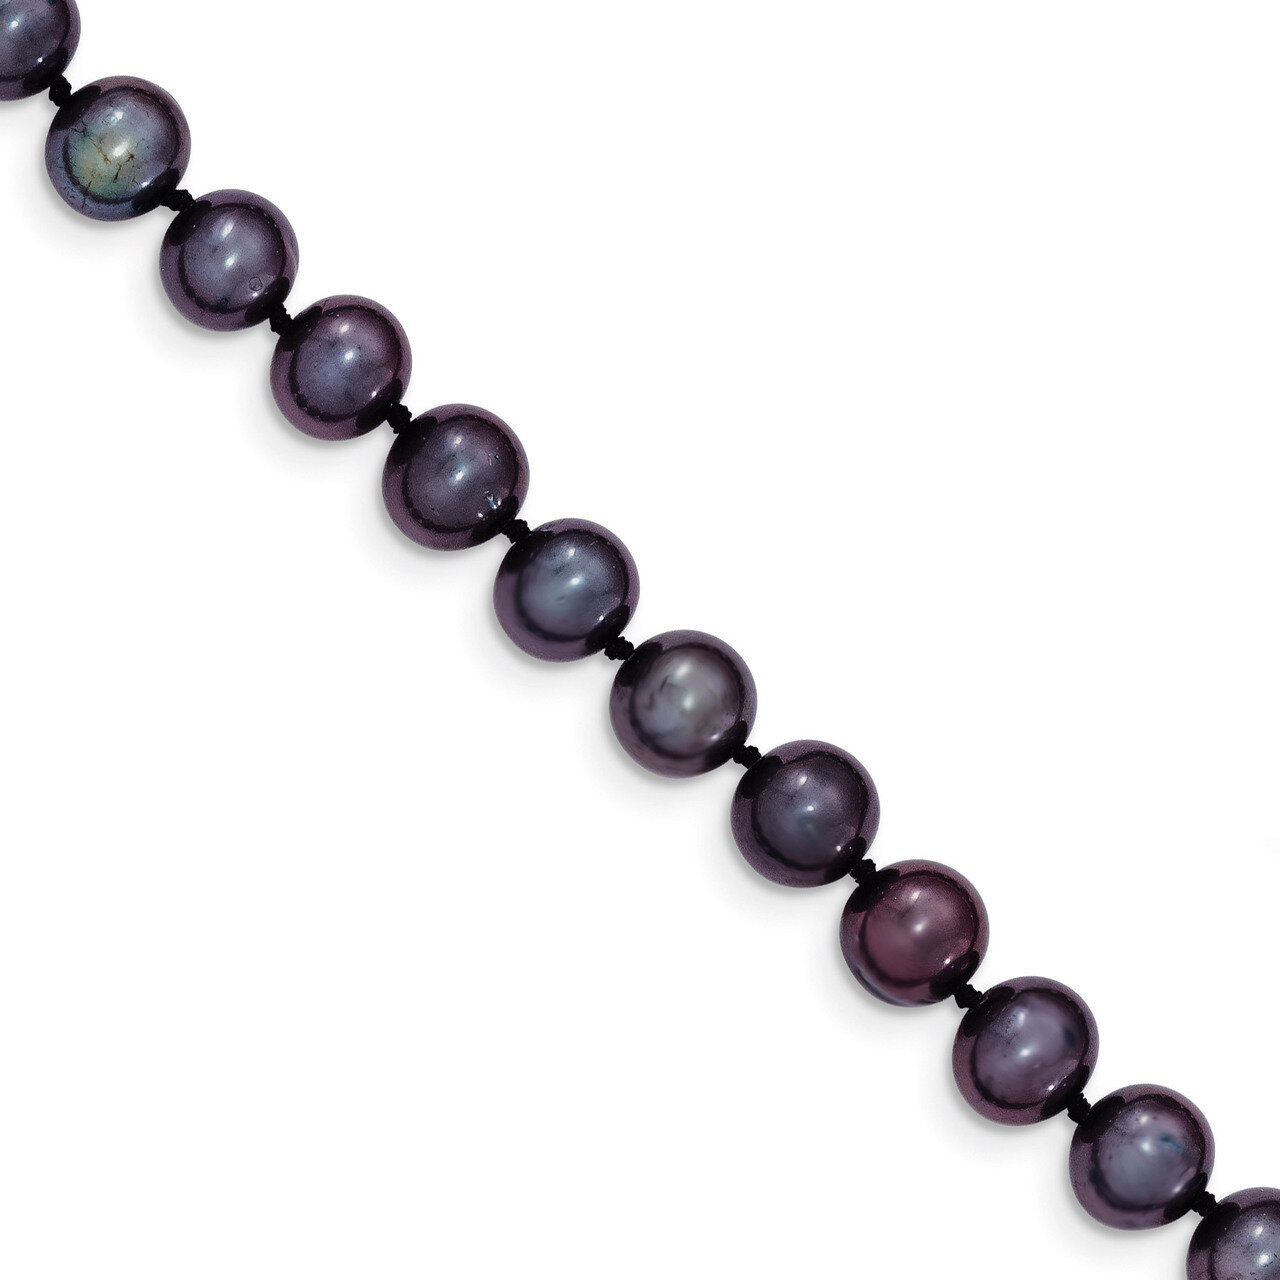 7-8mm Black Cultured Near Round Pearl Necklace 18 Inch 14k Gold BPN070-18